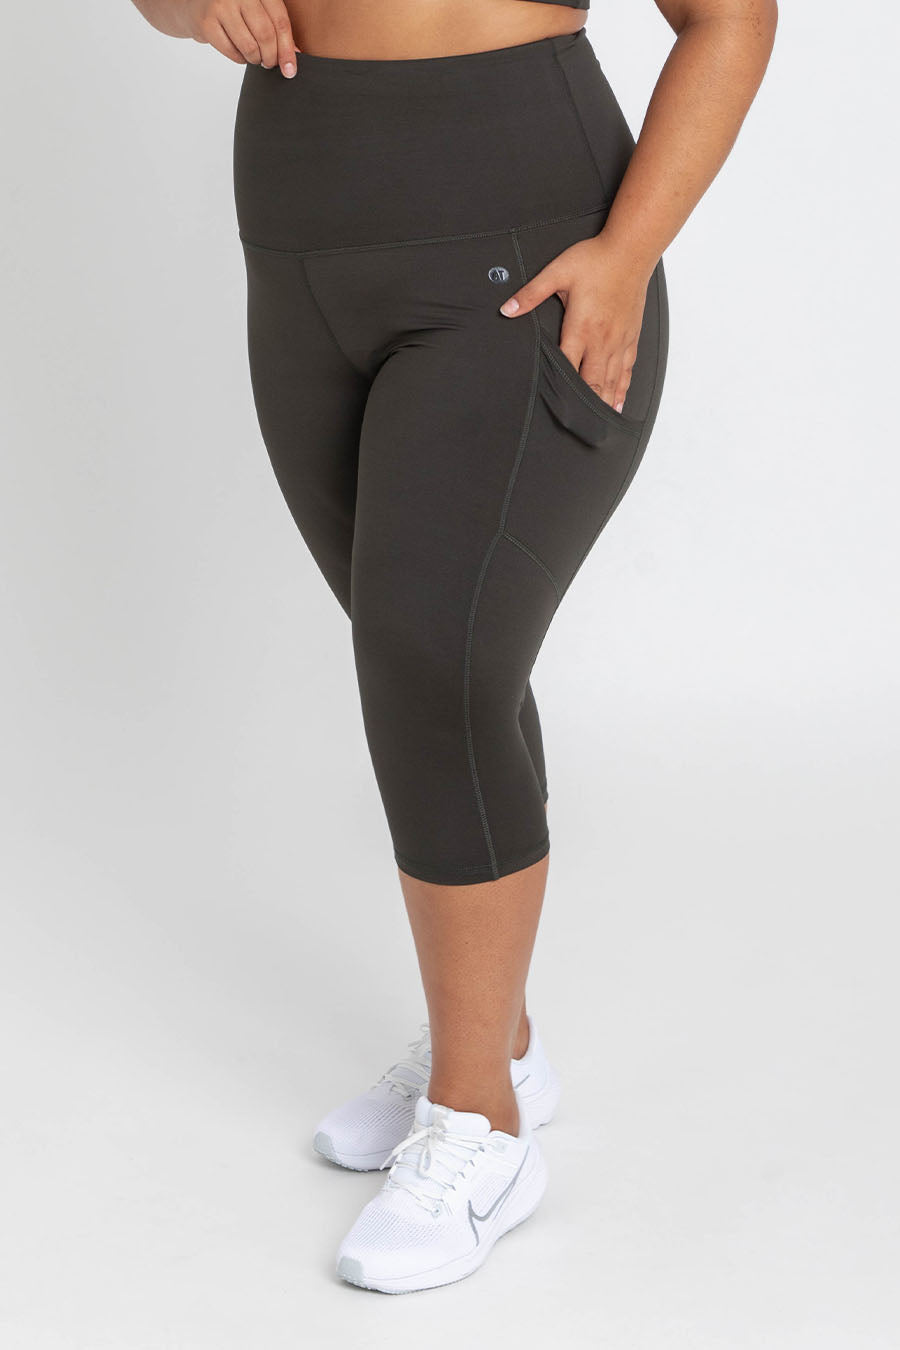 Smart Pocket 3/4 Length Gym Tights - Forest Night, Active Truth